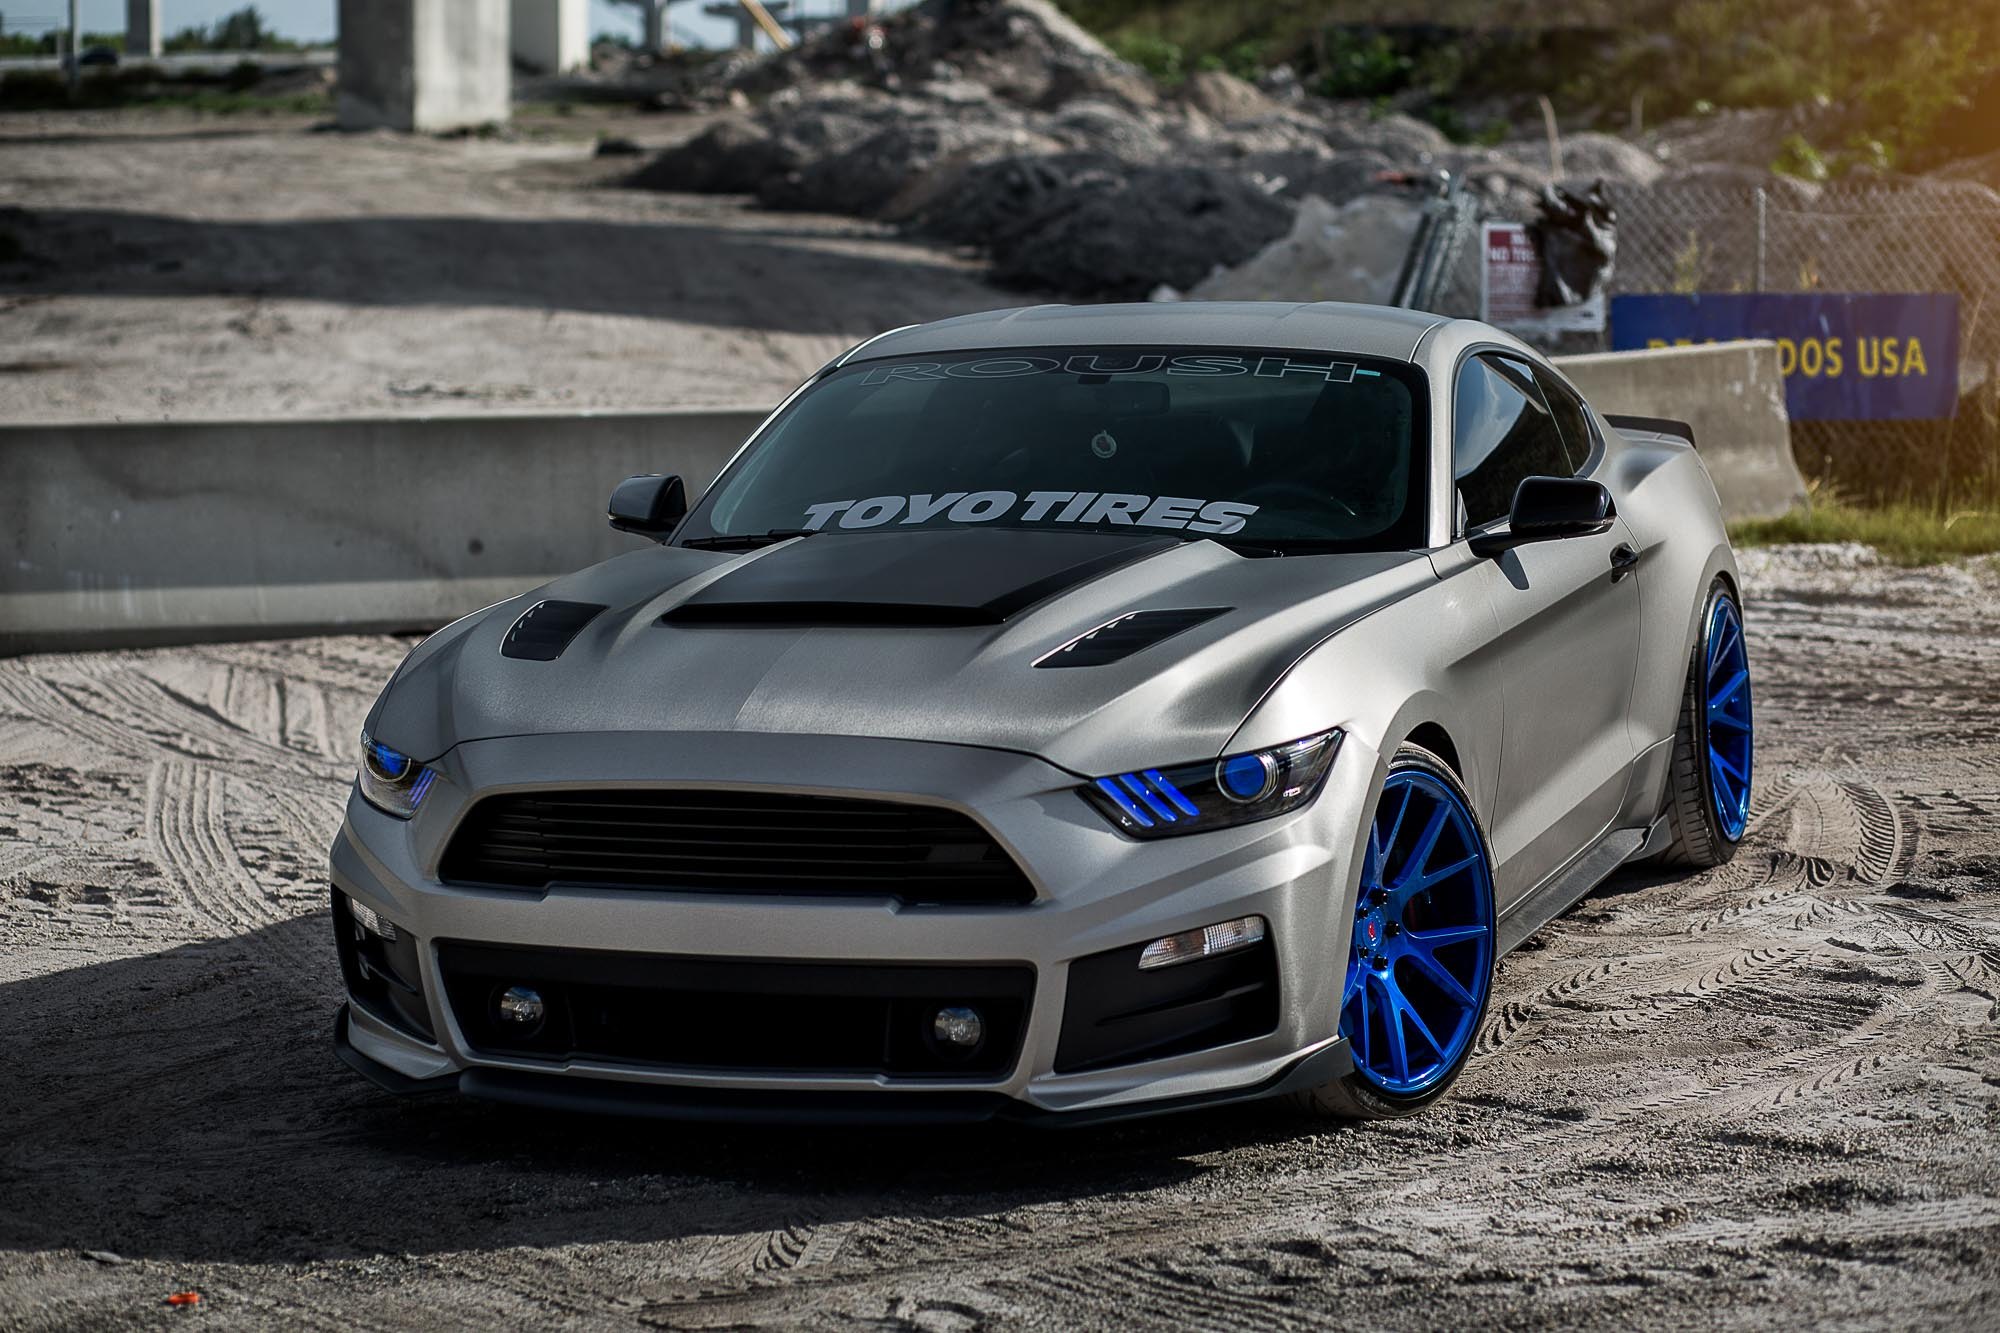 2015 Roush performance Ford Mustang GT - Photo by Vossen